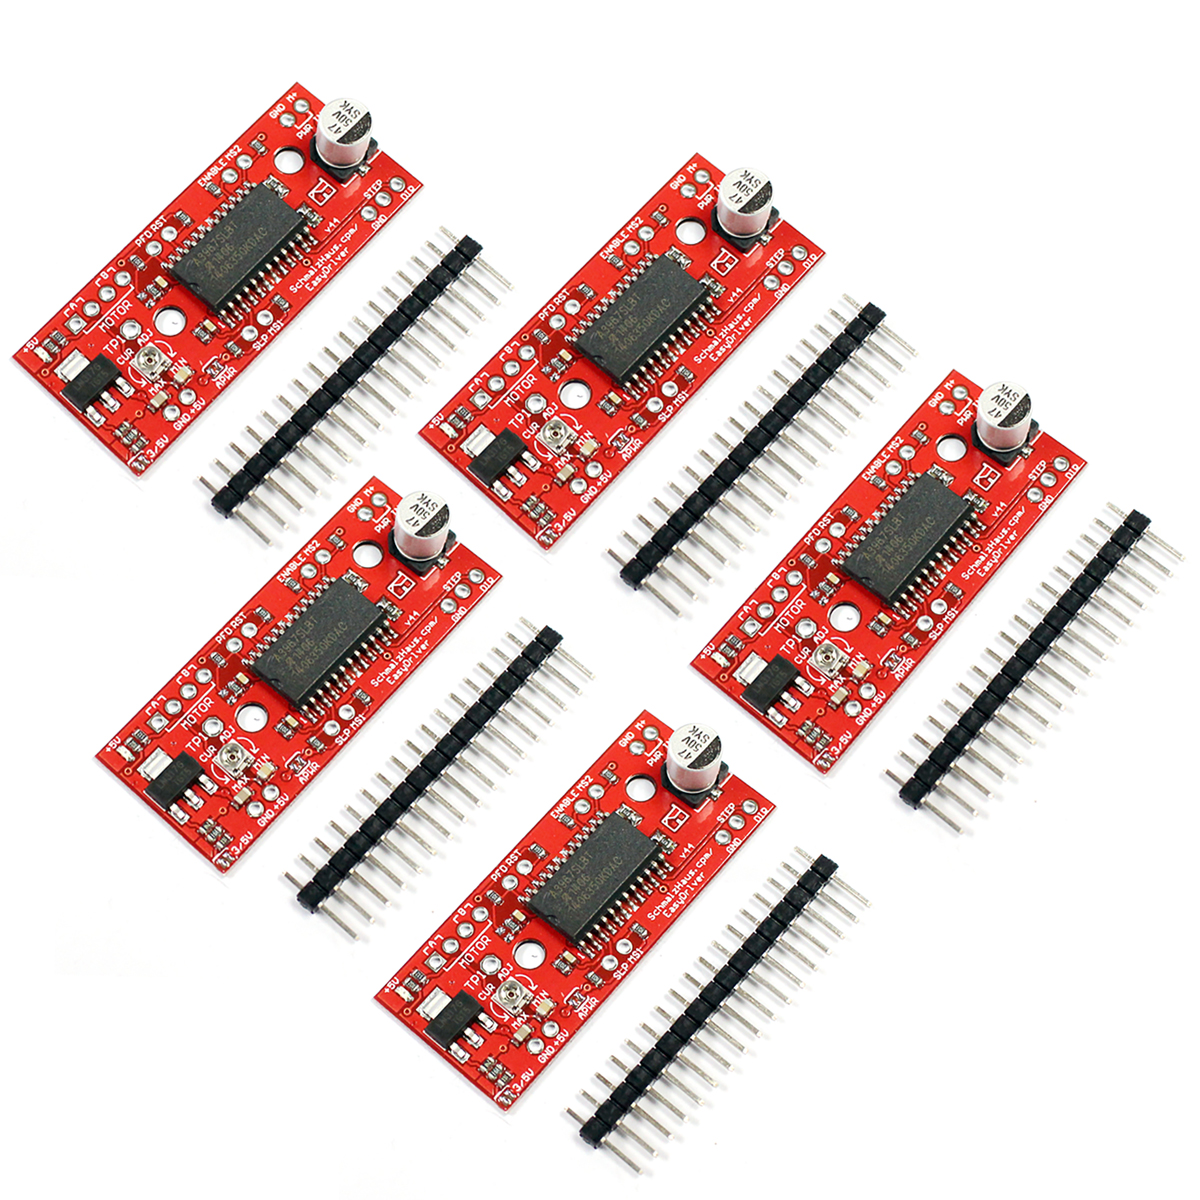 5pcs Stable Red A3967 EasyDriver Stepper Motor Driver V4.4 + 5pcs Pin Header For Arduino Electrical Supplies Mayitr